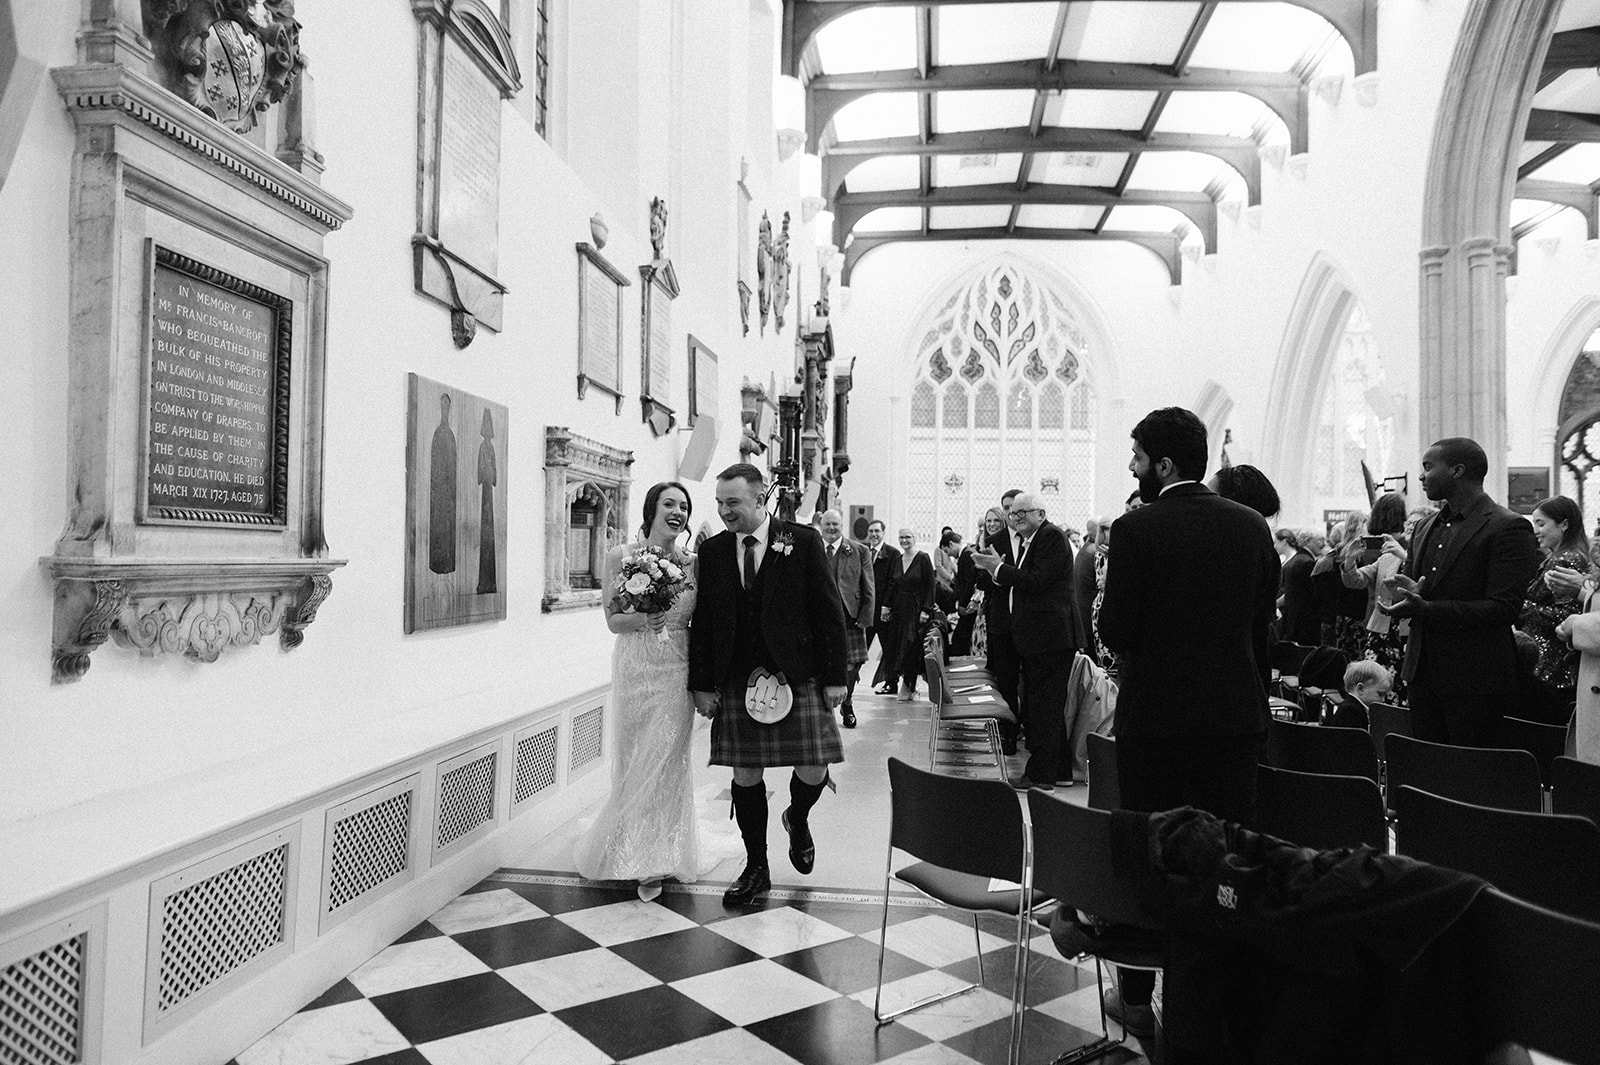 Bride and groom leaving St Helen's Church Bishopsgate after their wedding